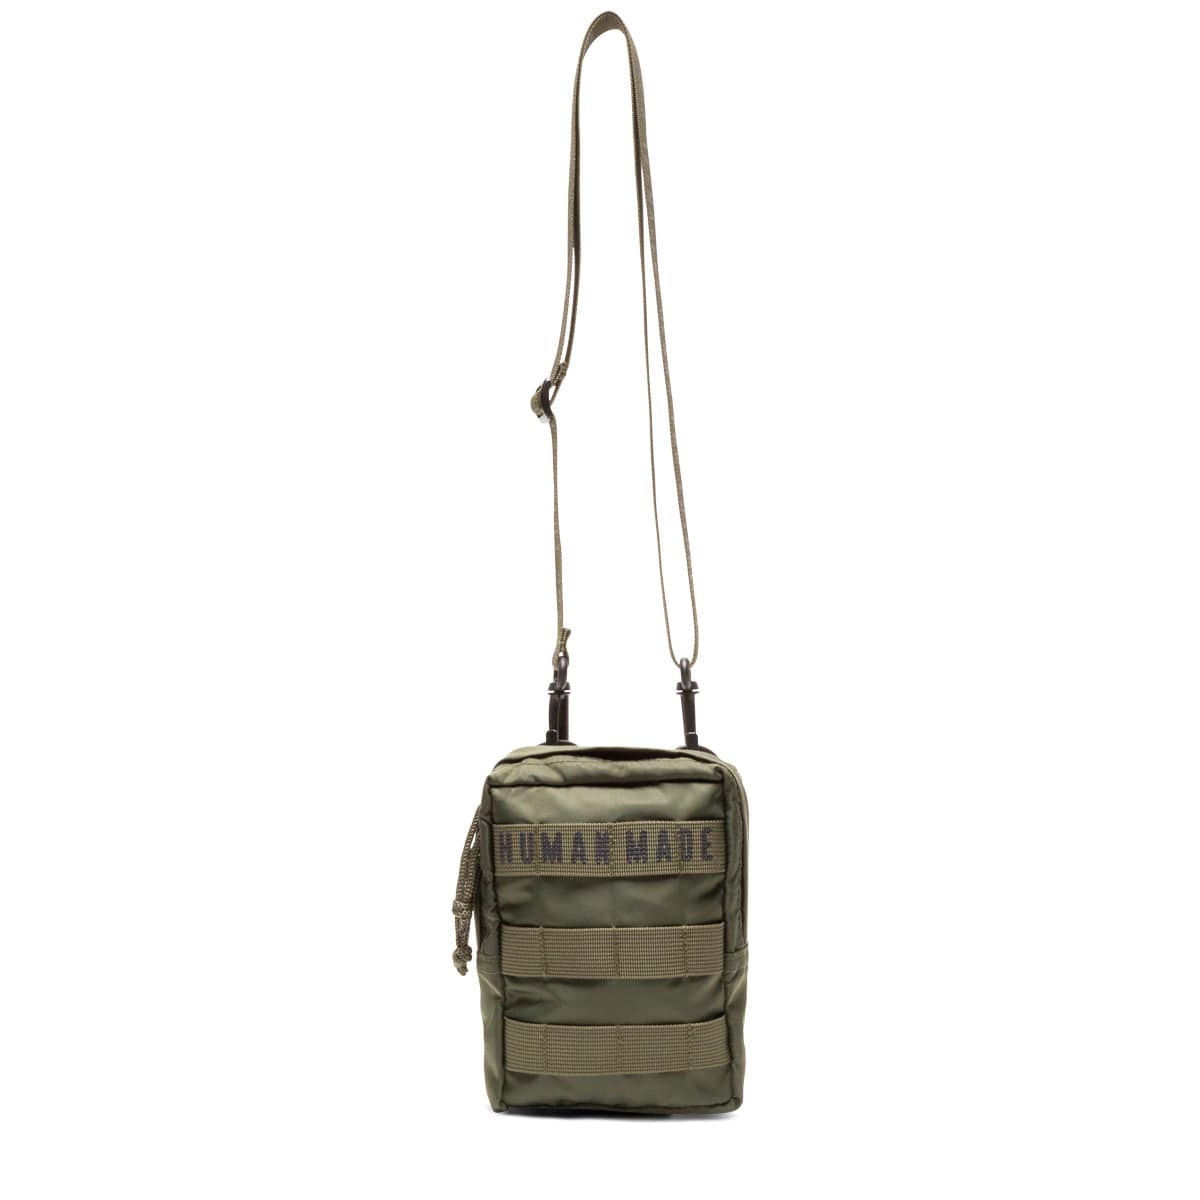 HUMAN MADE Military Pouch #2 Olive Drab - ショルダーバッグ